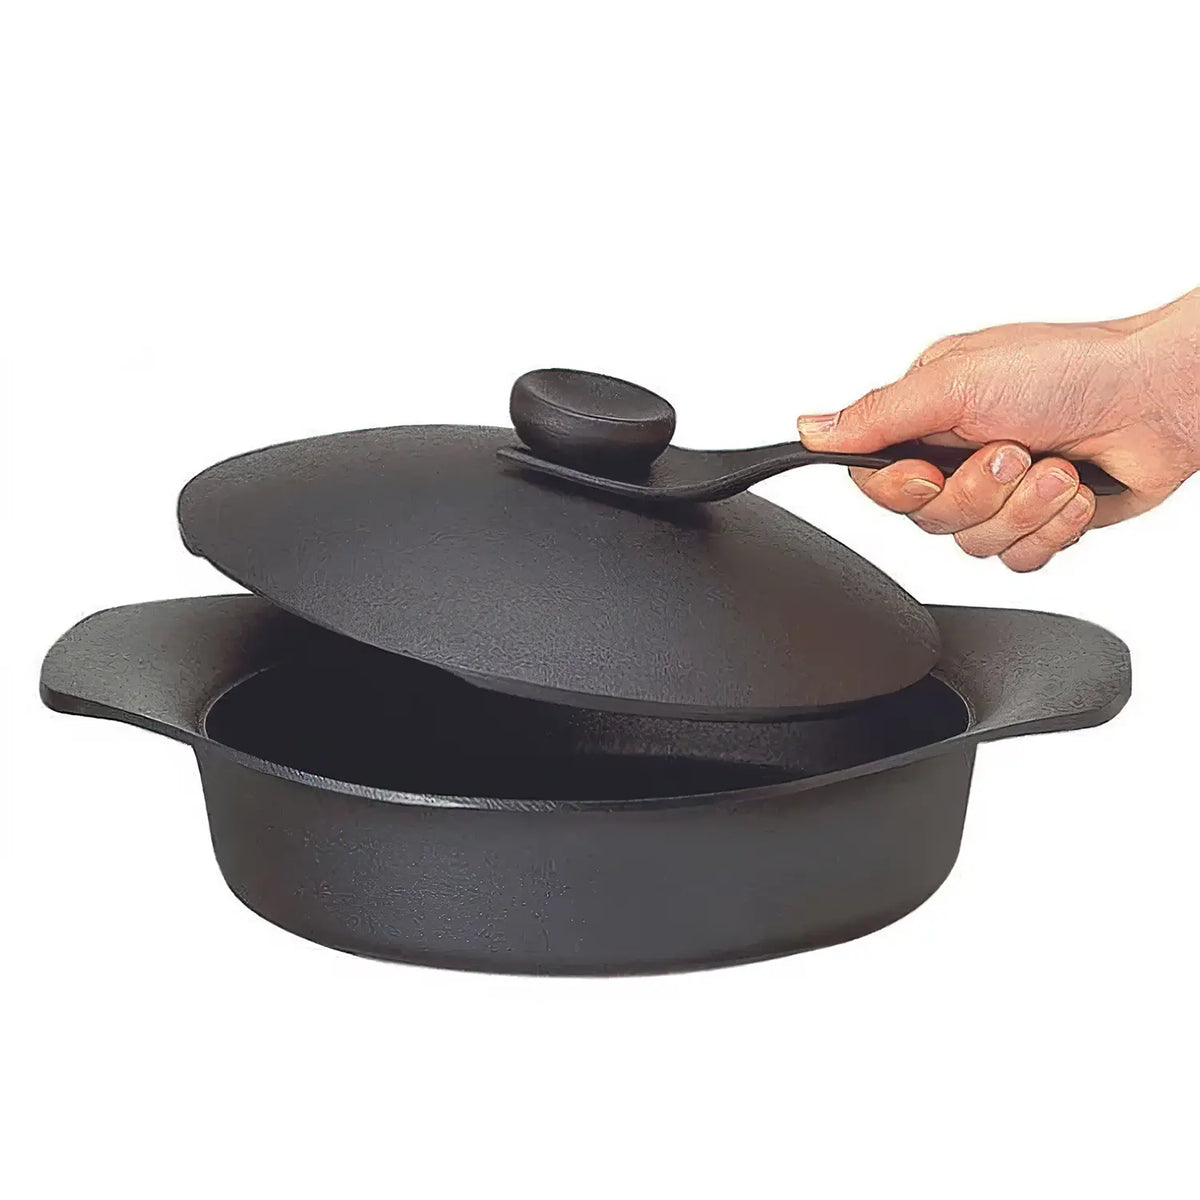  Induction Grill Pan